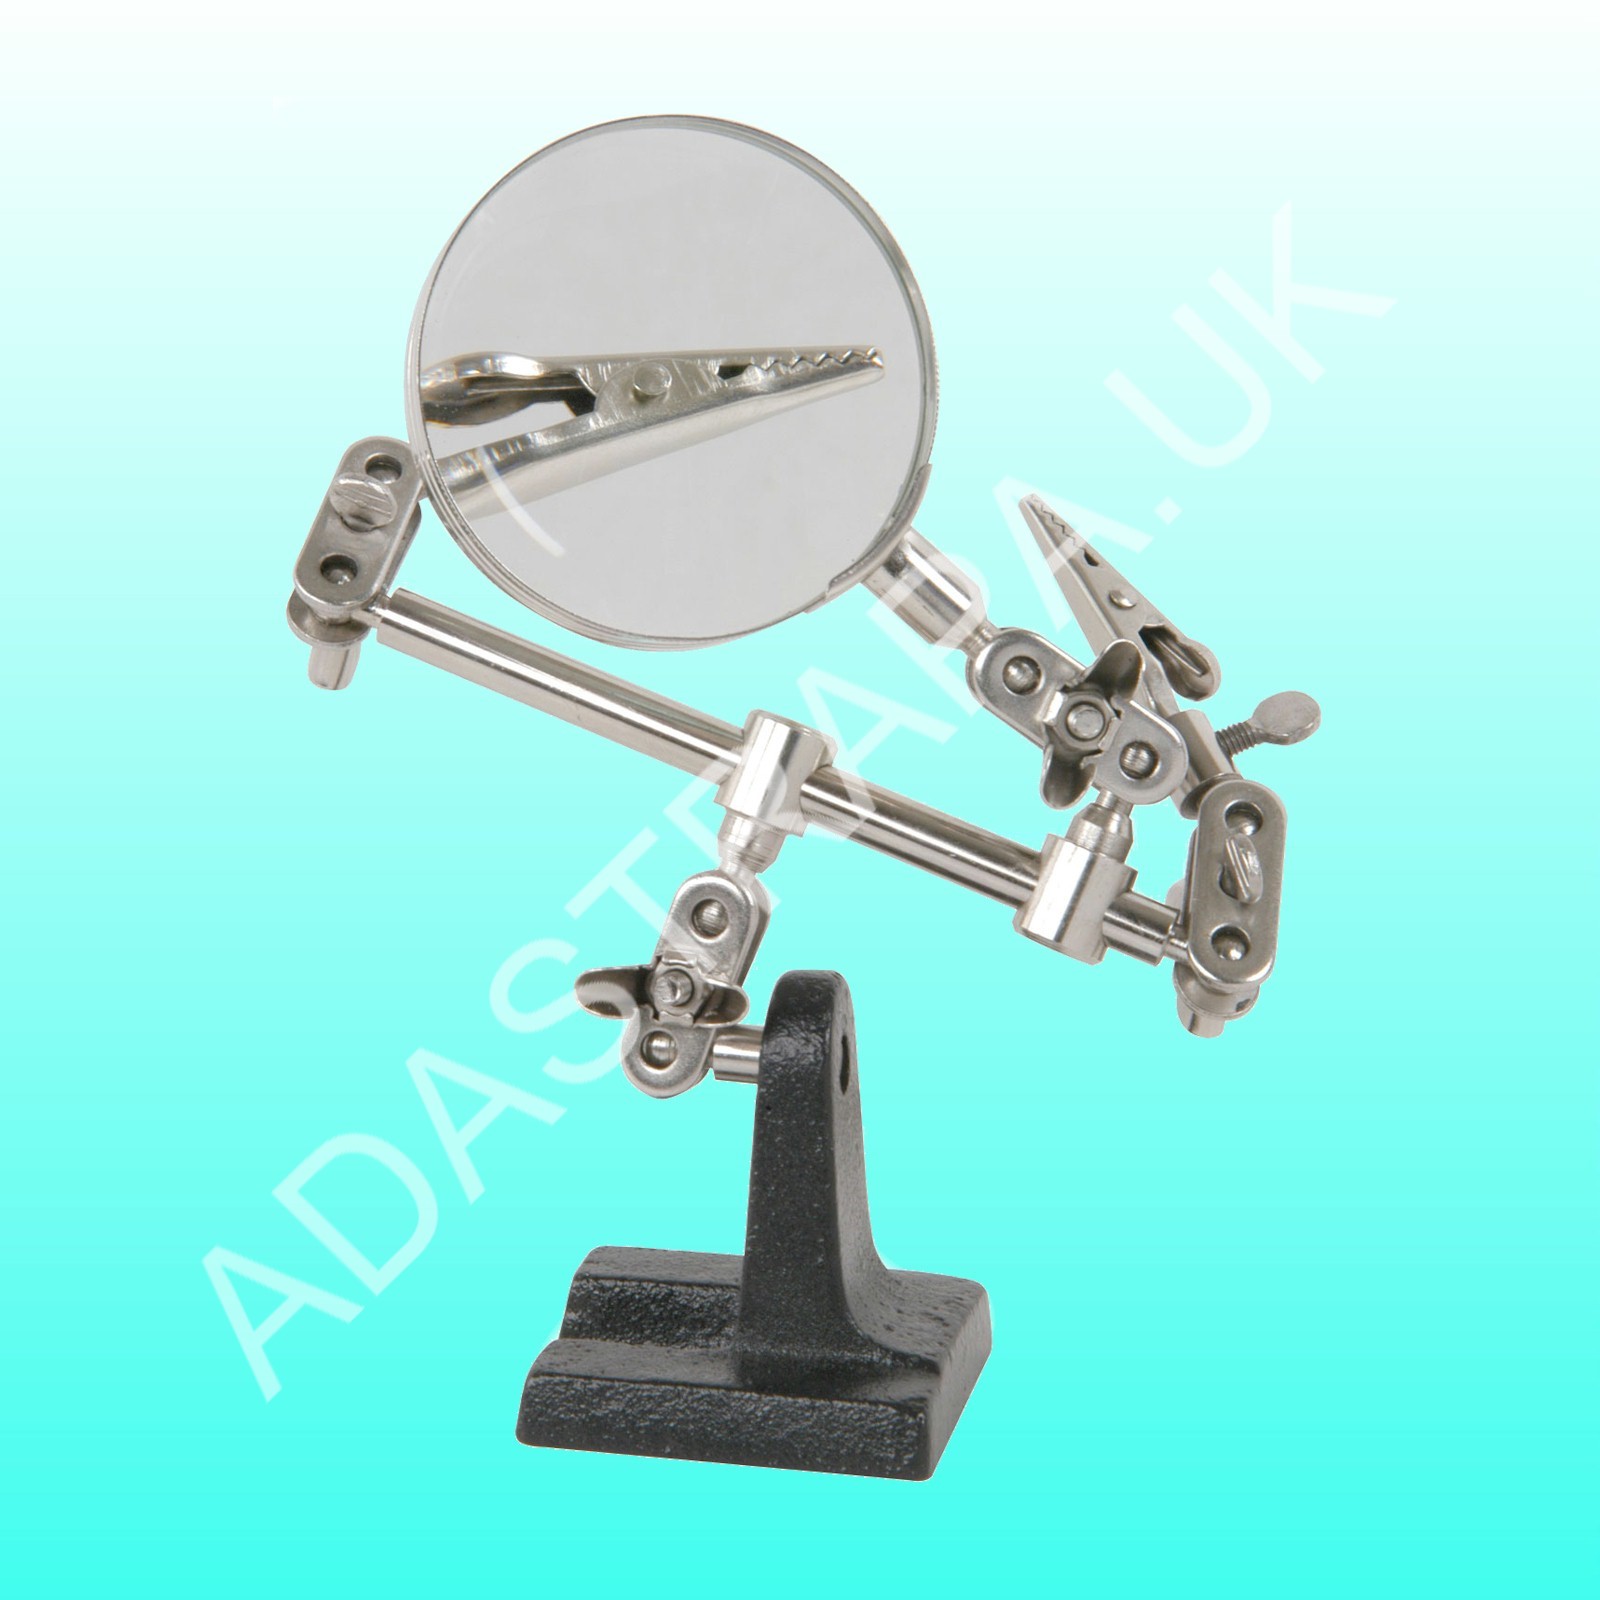 Mercury MAG01 Helping Hand with Magnifier  - 710.165UK